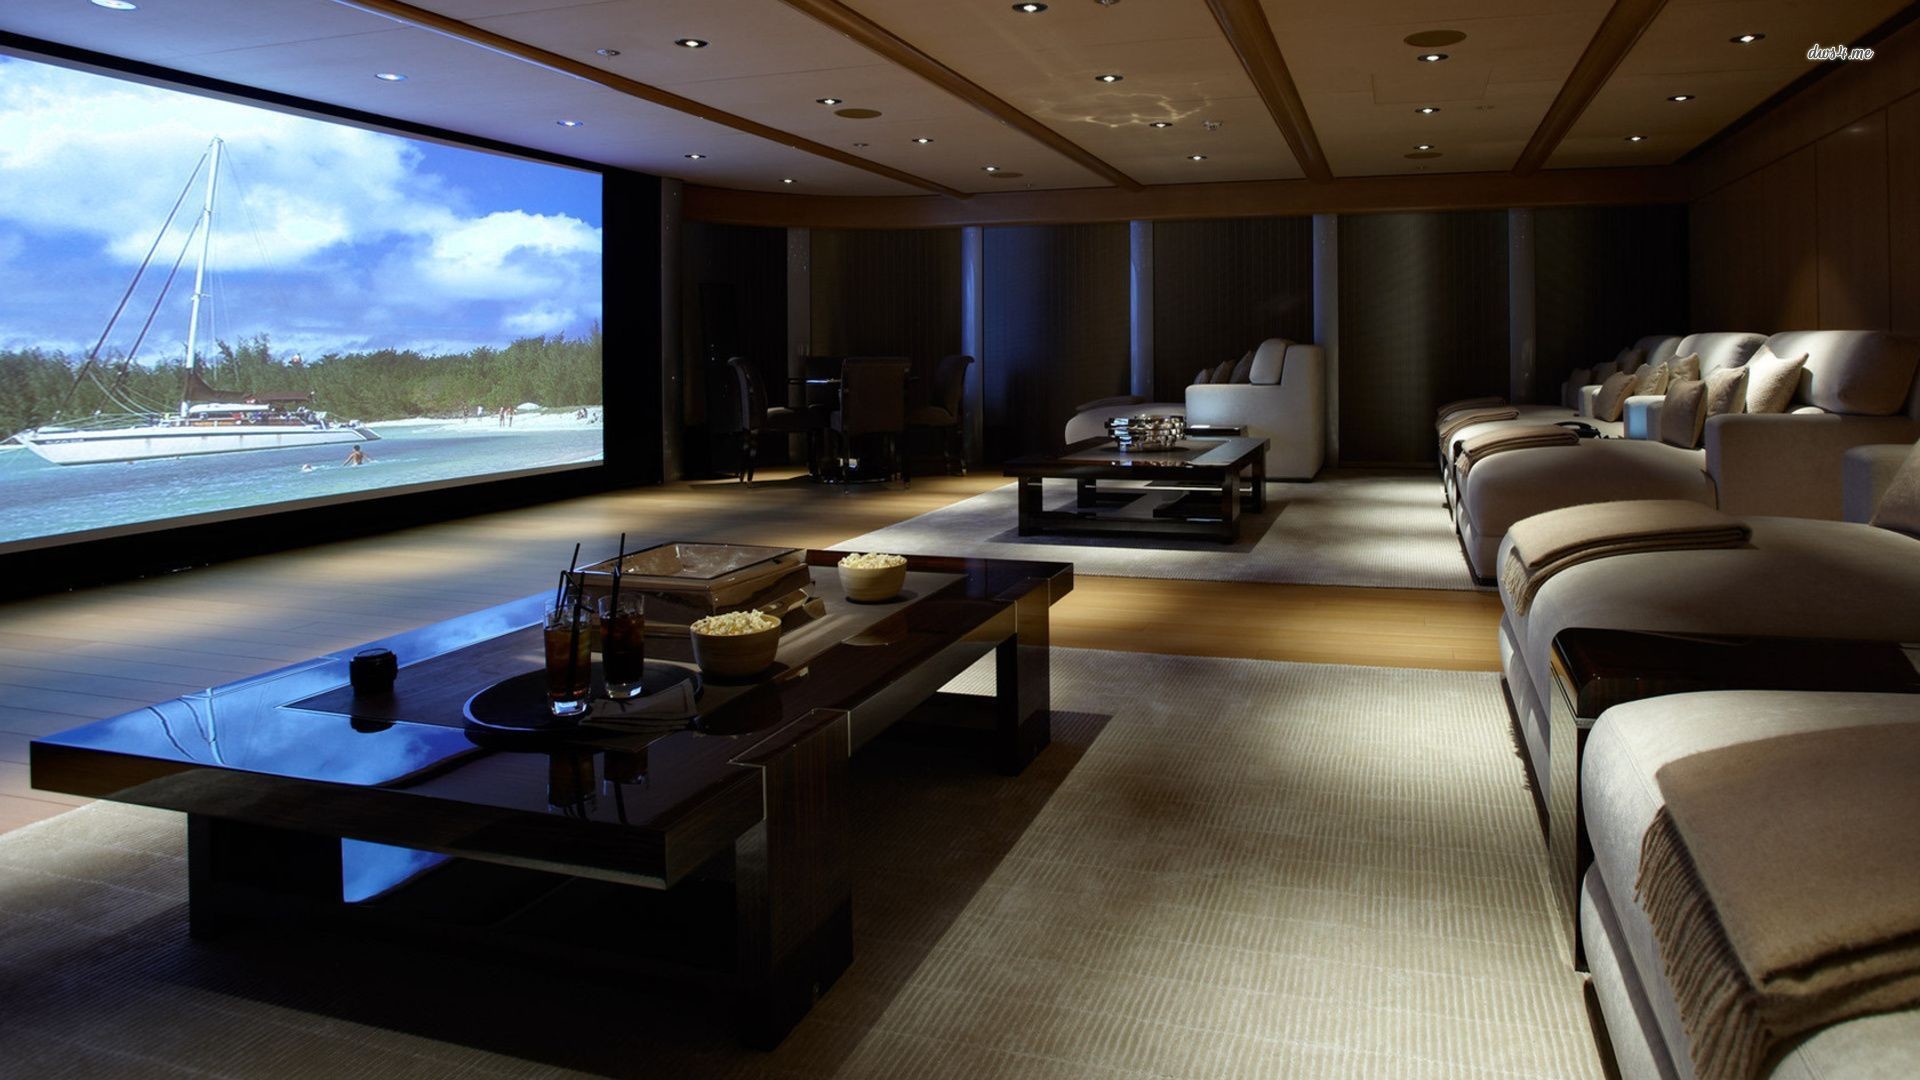 1920x1080 Home Theater Wallpaper for Desktop. Home Theater W..